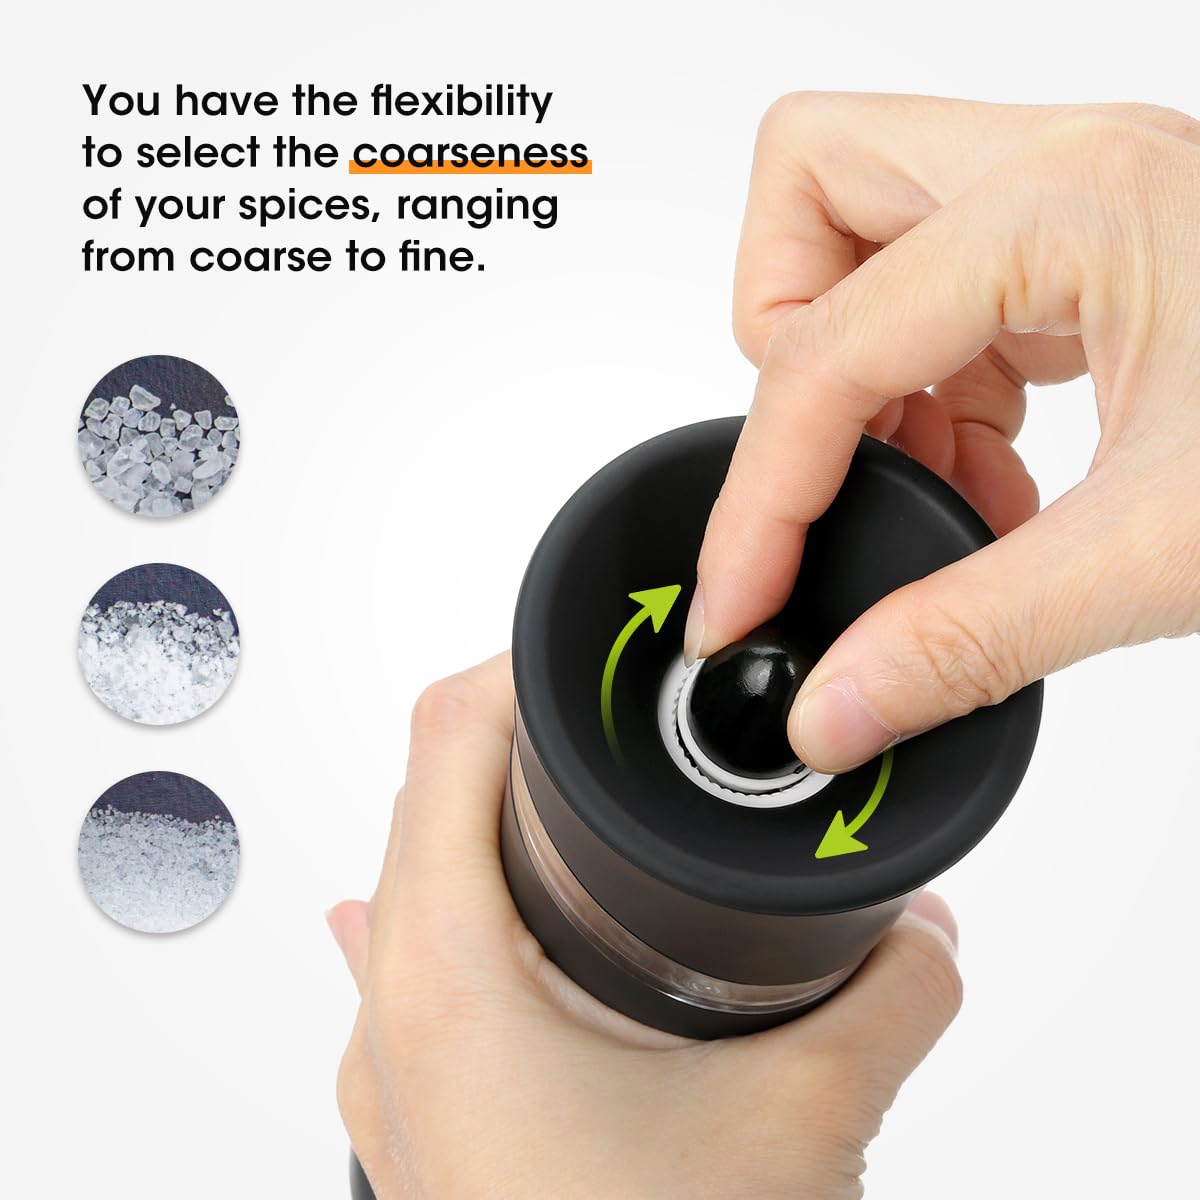 You have the flexibility to select the coarseness of your spices, ranging from coarse to fine.